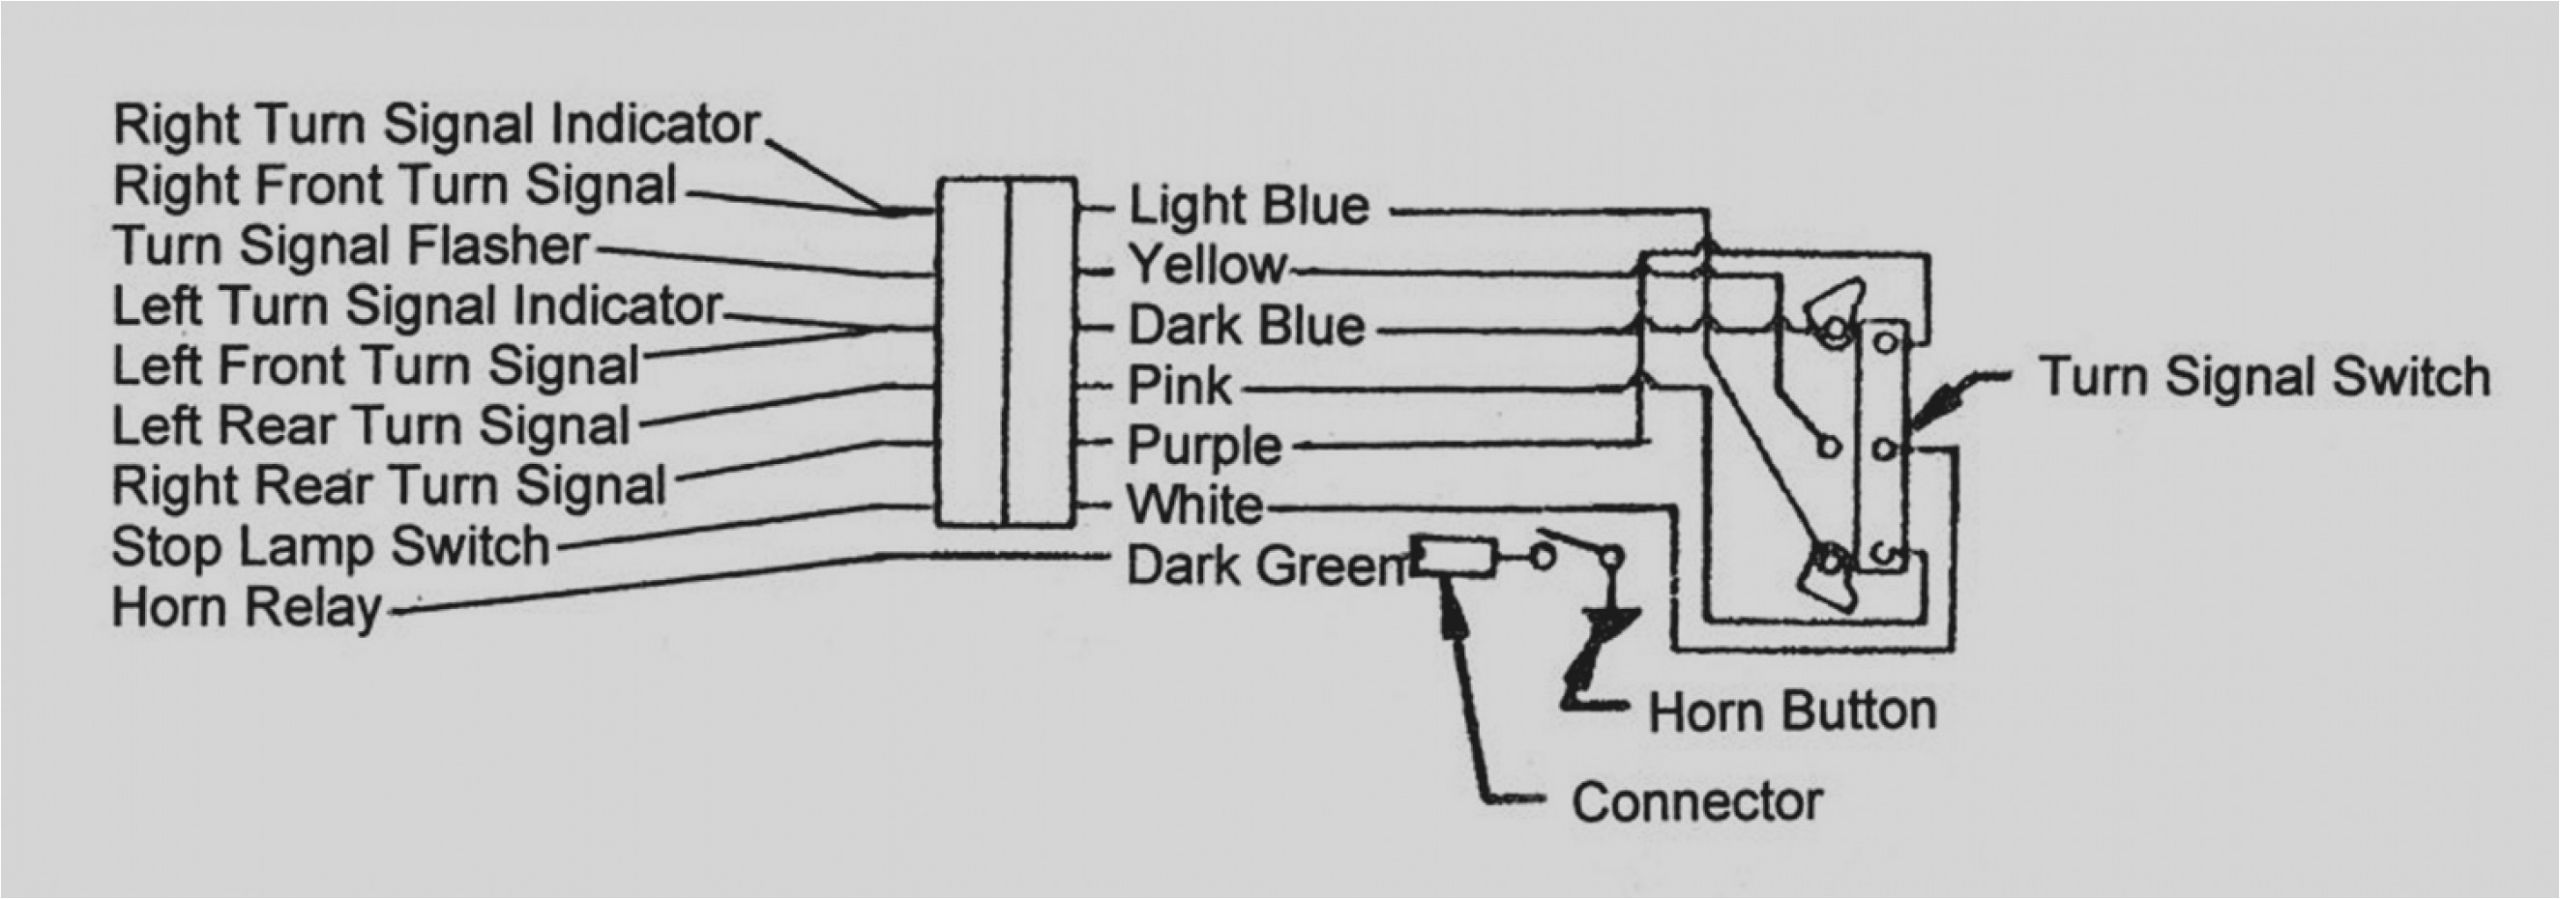 wiring a switch with an indicator u2022 infinitybox wiring diagram